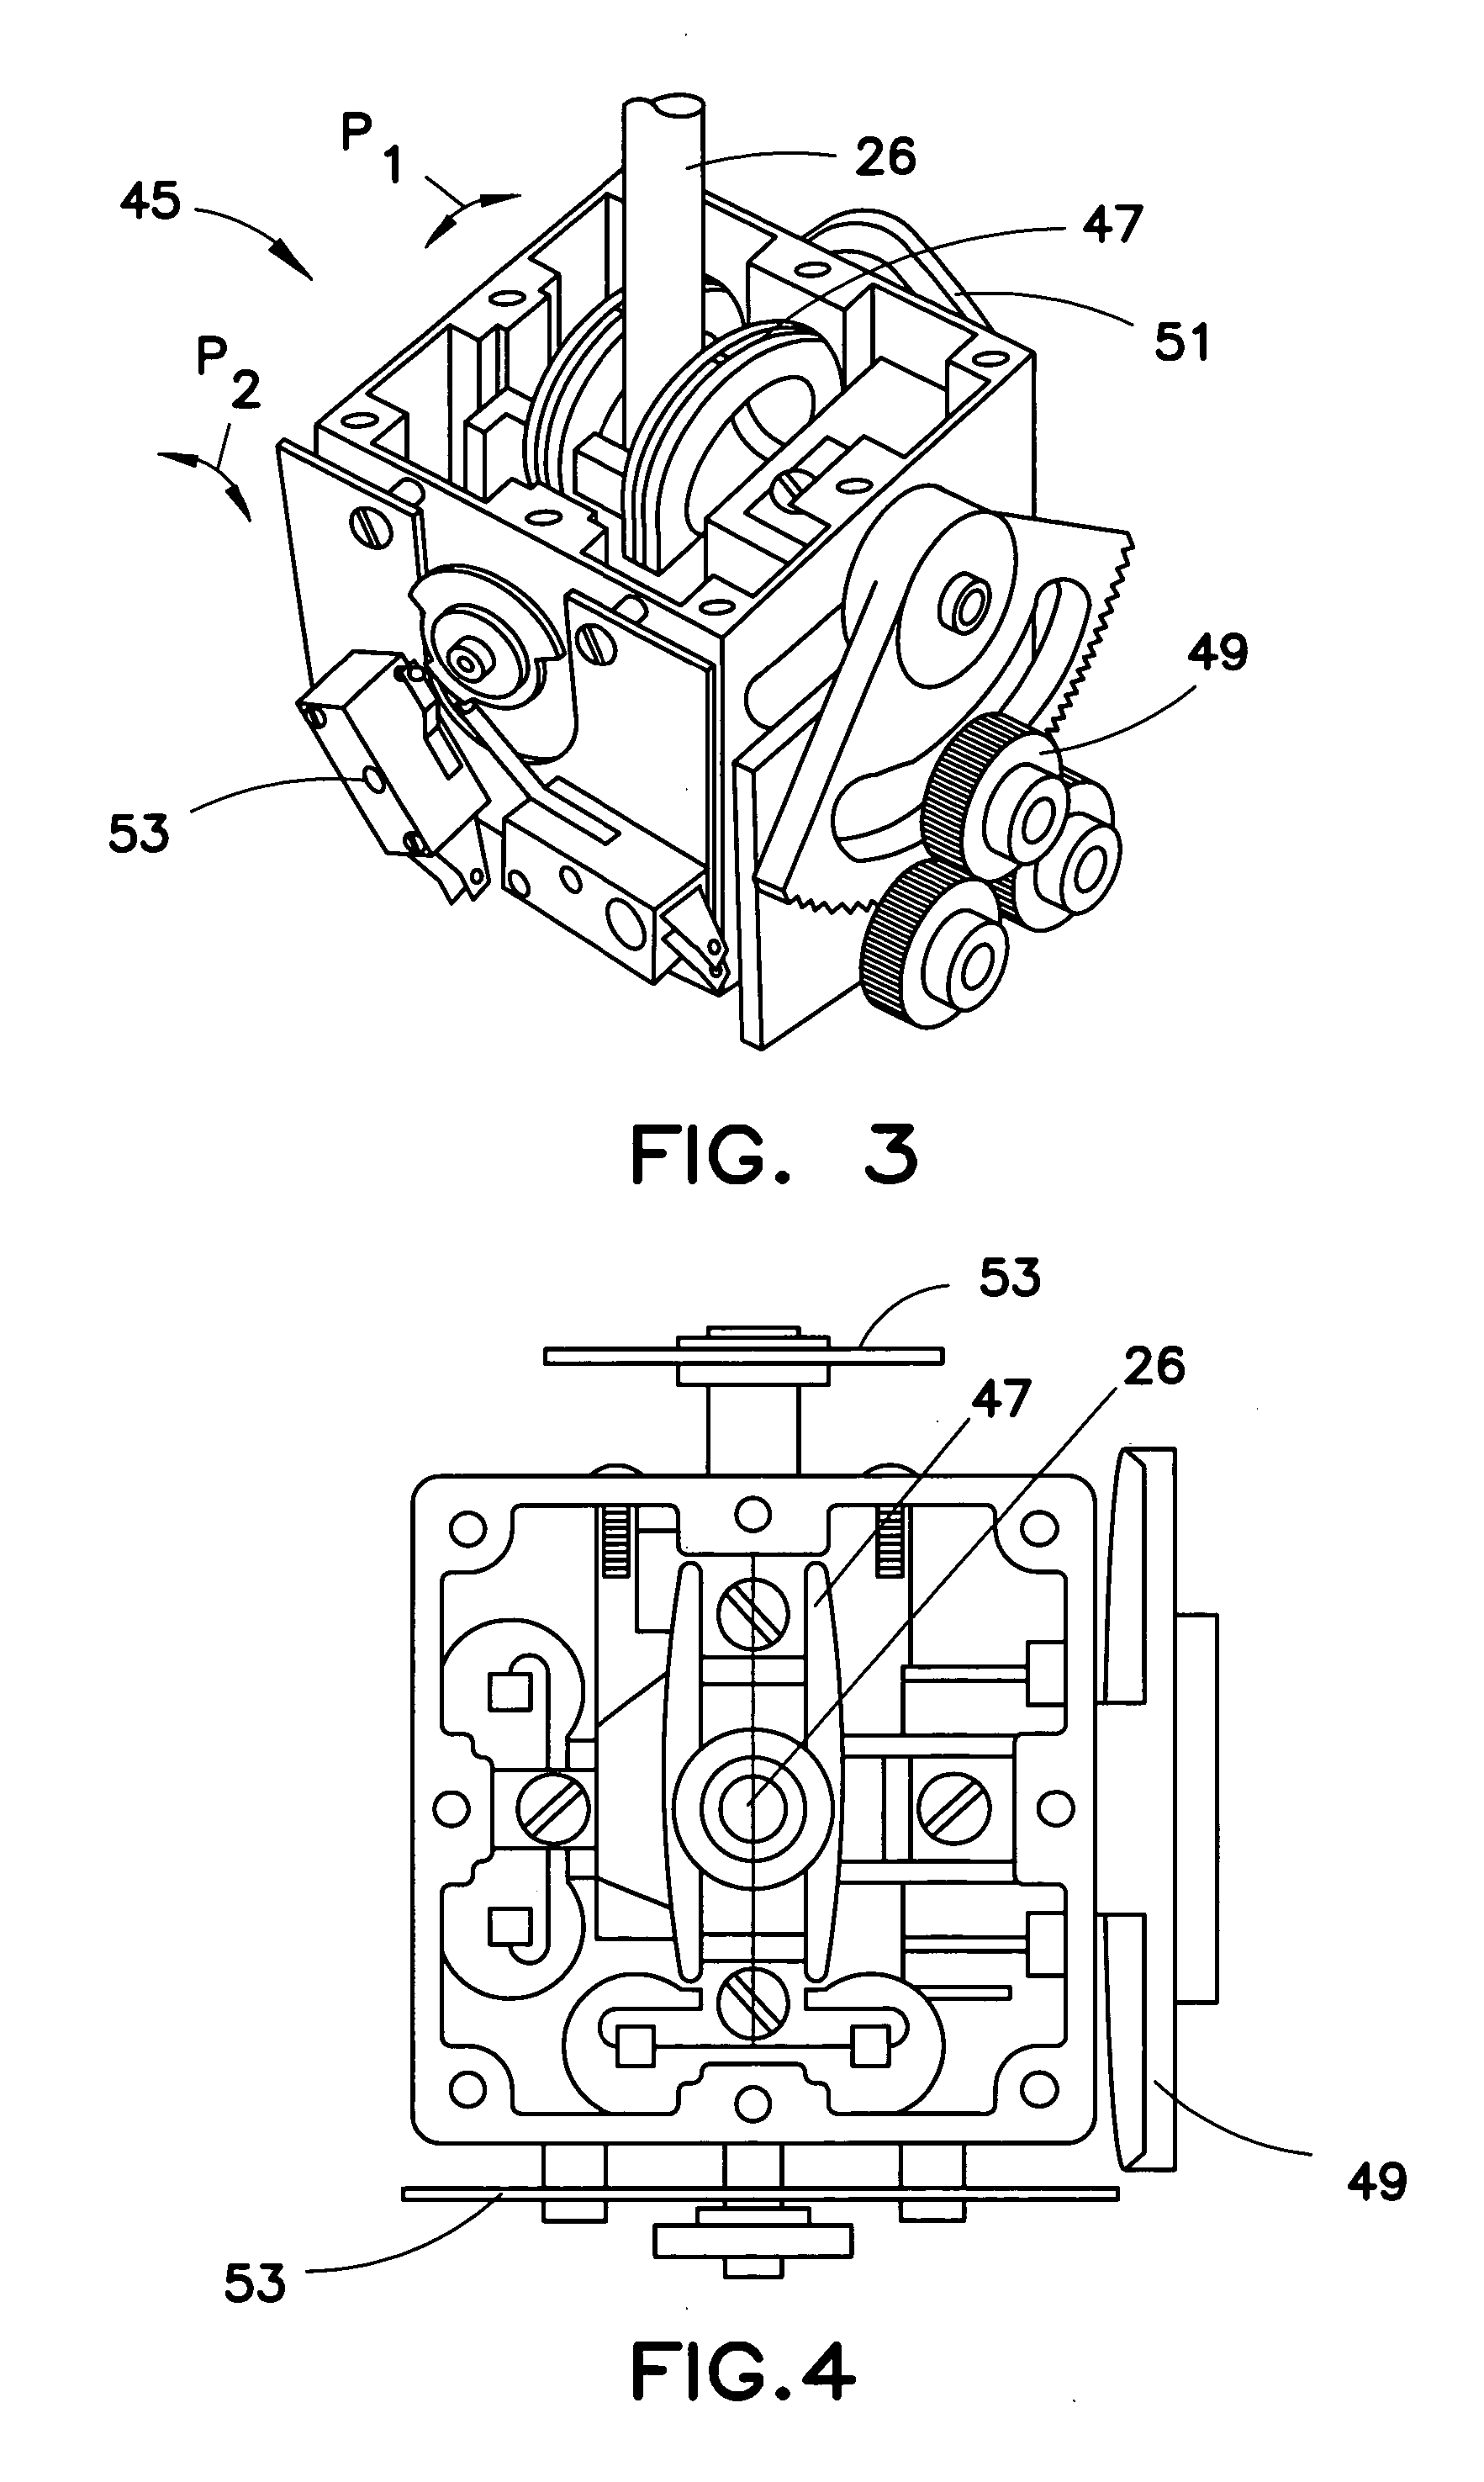 Joystick-operated driving system